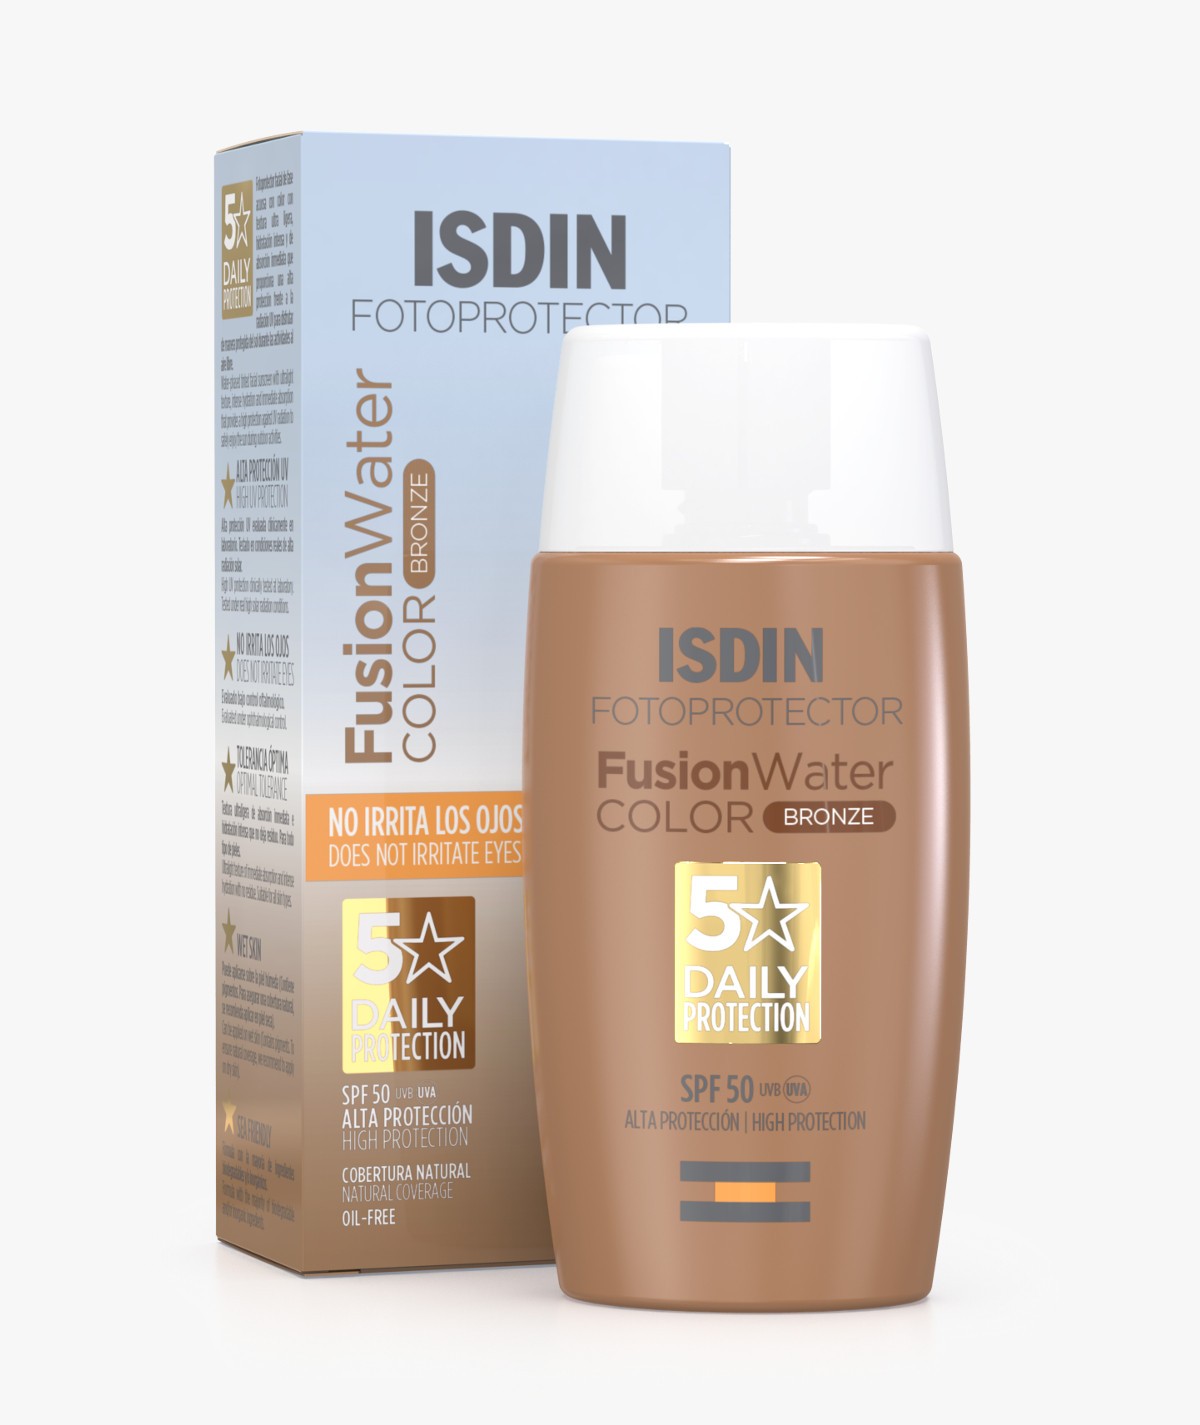 Isdin fotoprotector fusion water SPF 50 color bronze, 50 ml